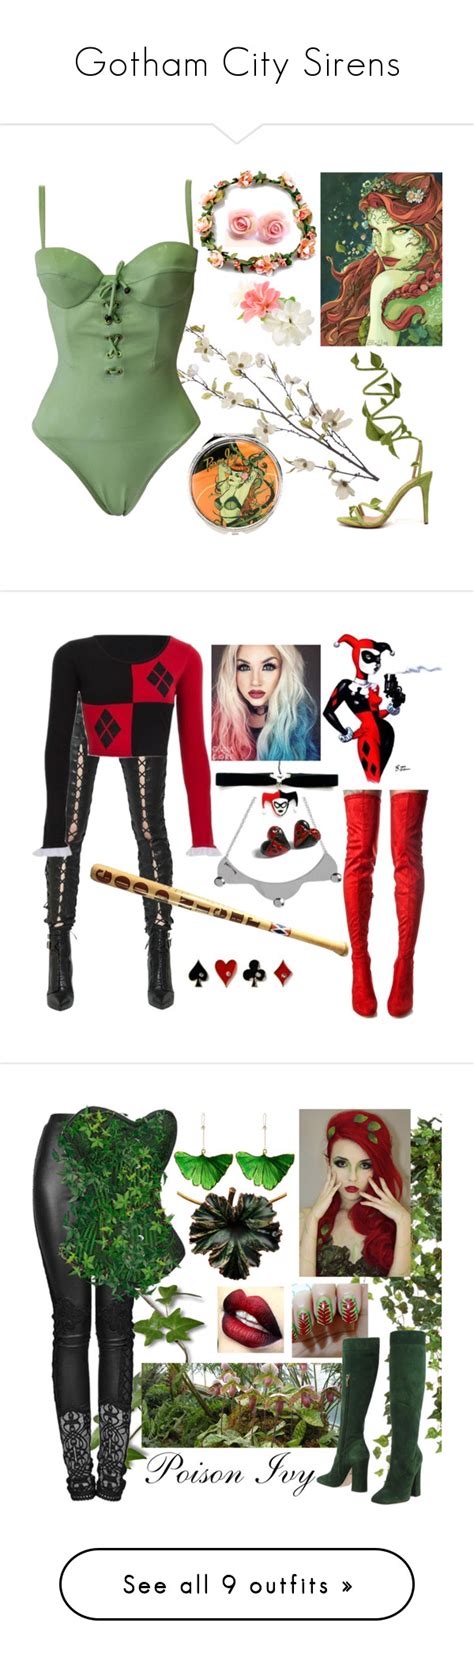 Gotham City Sirens By Kriss Amythest Liked On Polyvore Featuring Pier 1 Imports Versace